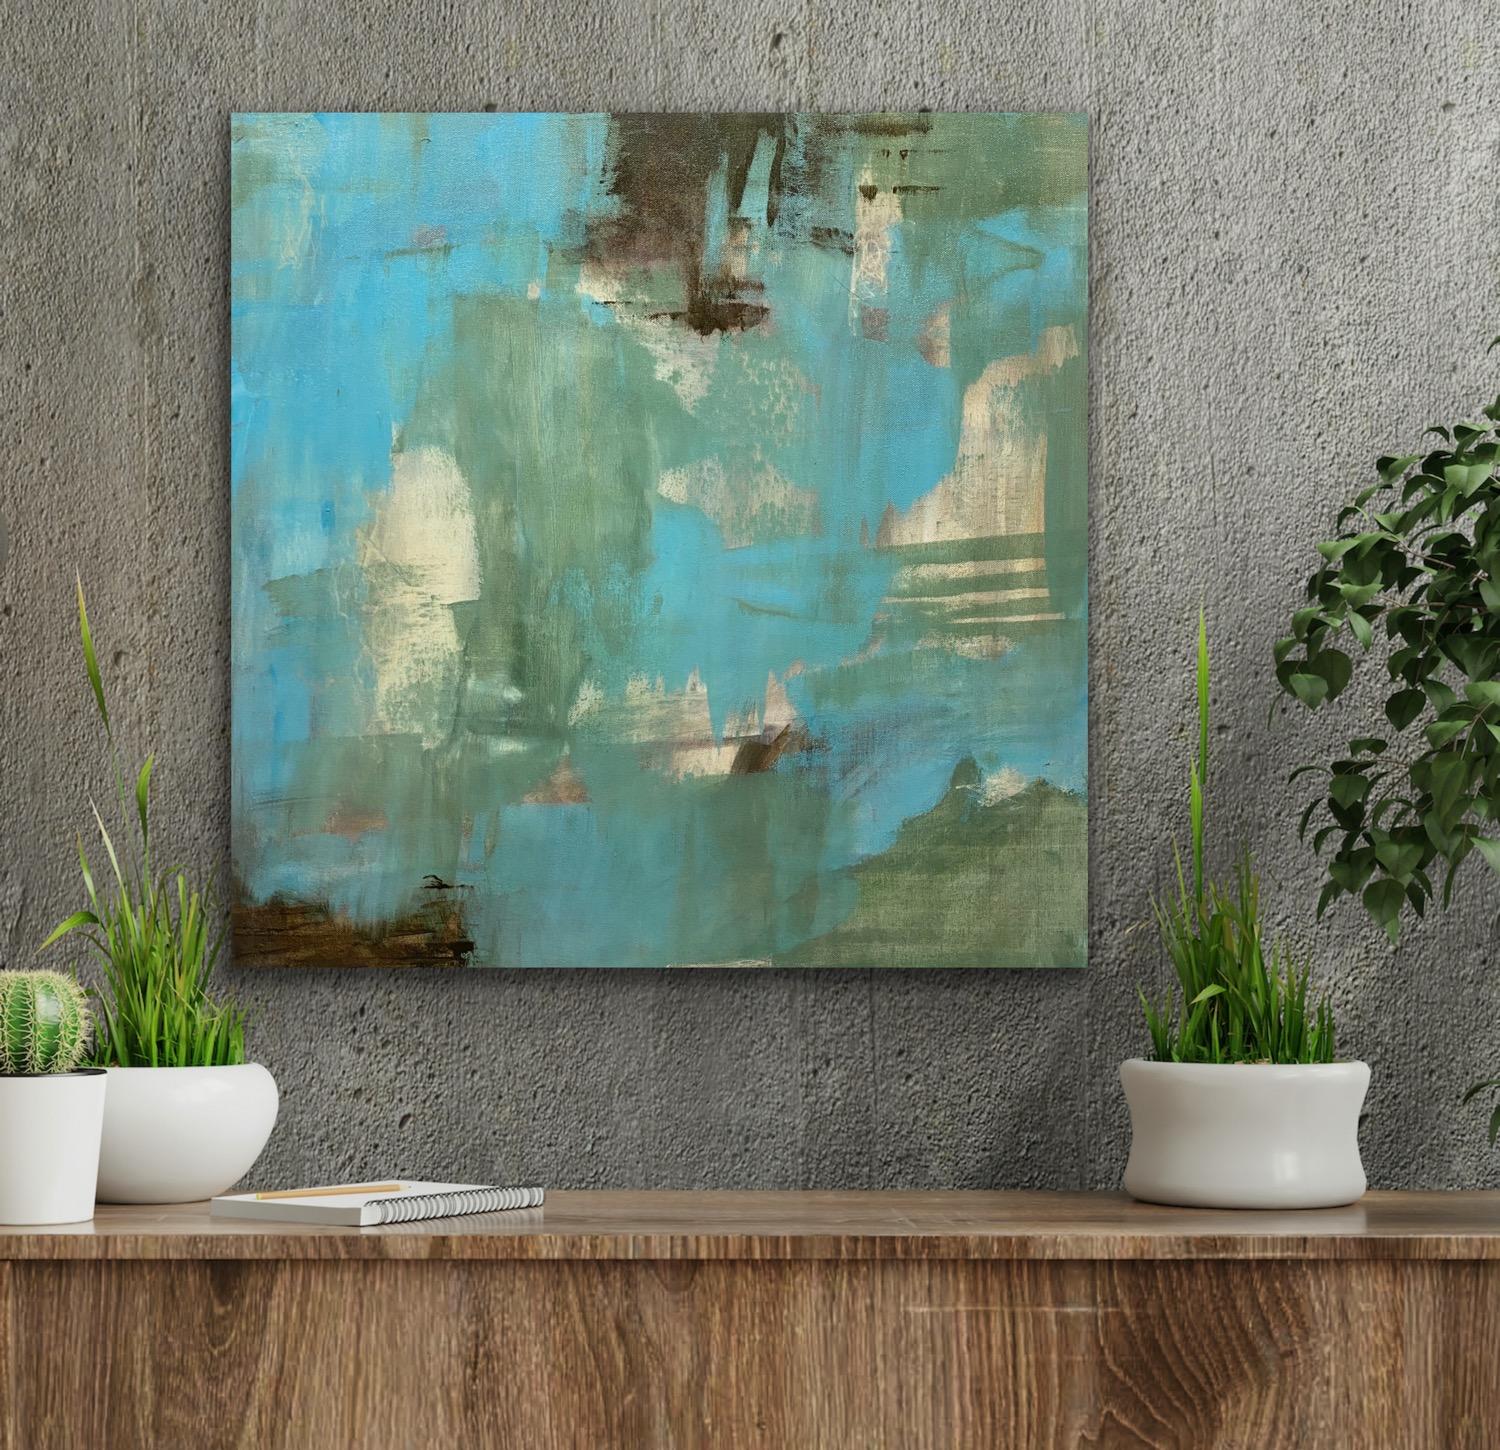 Down home, Contemporary abstract, teal, green, brown, white - Painting by Juanita Bellavance 